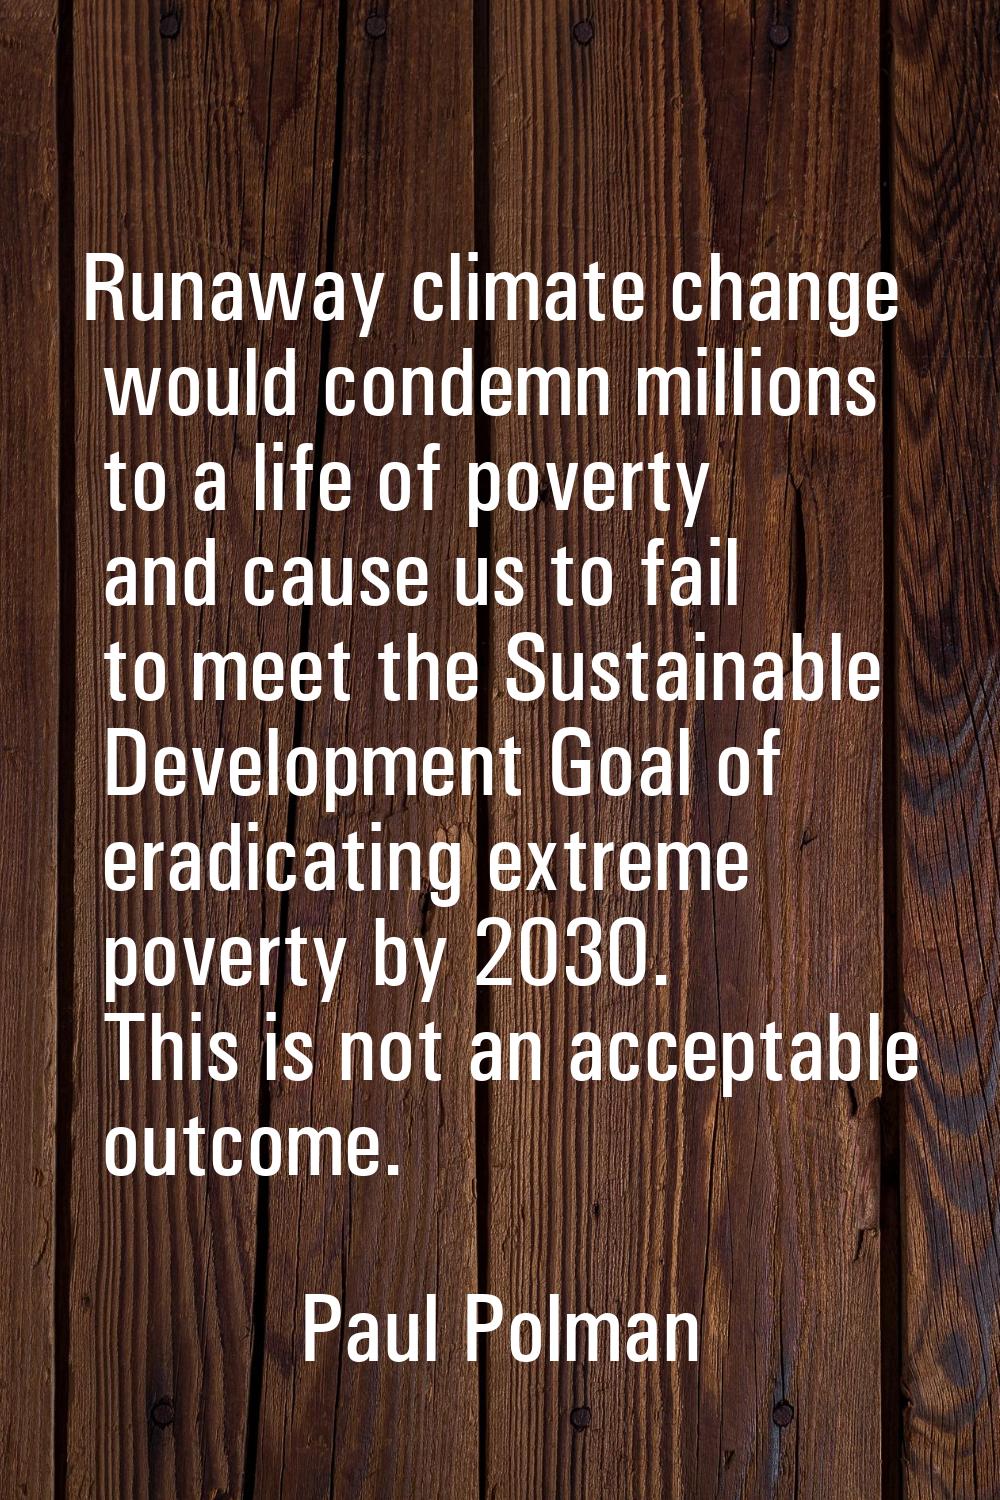 Runaway climate change would condemn millions to a life of poverty and cause us to fail to meet the